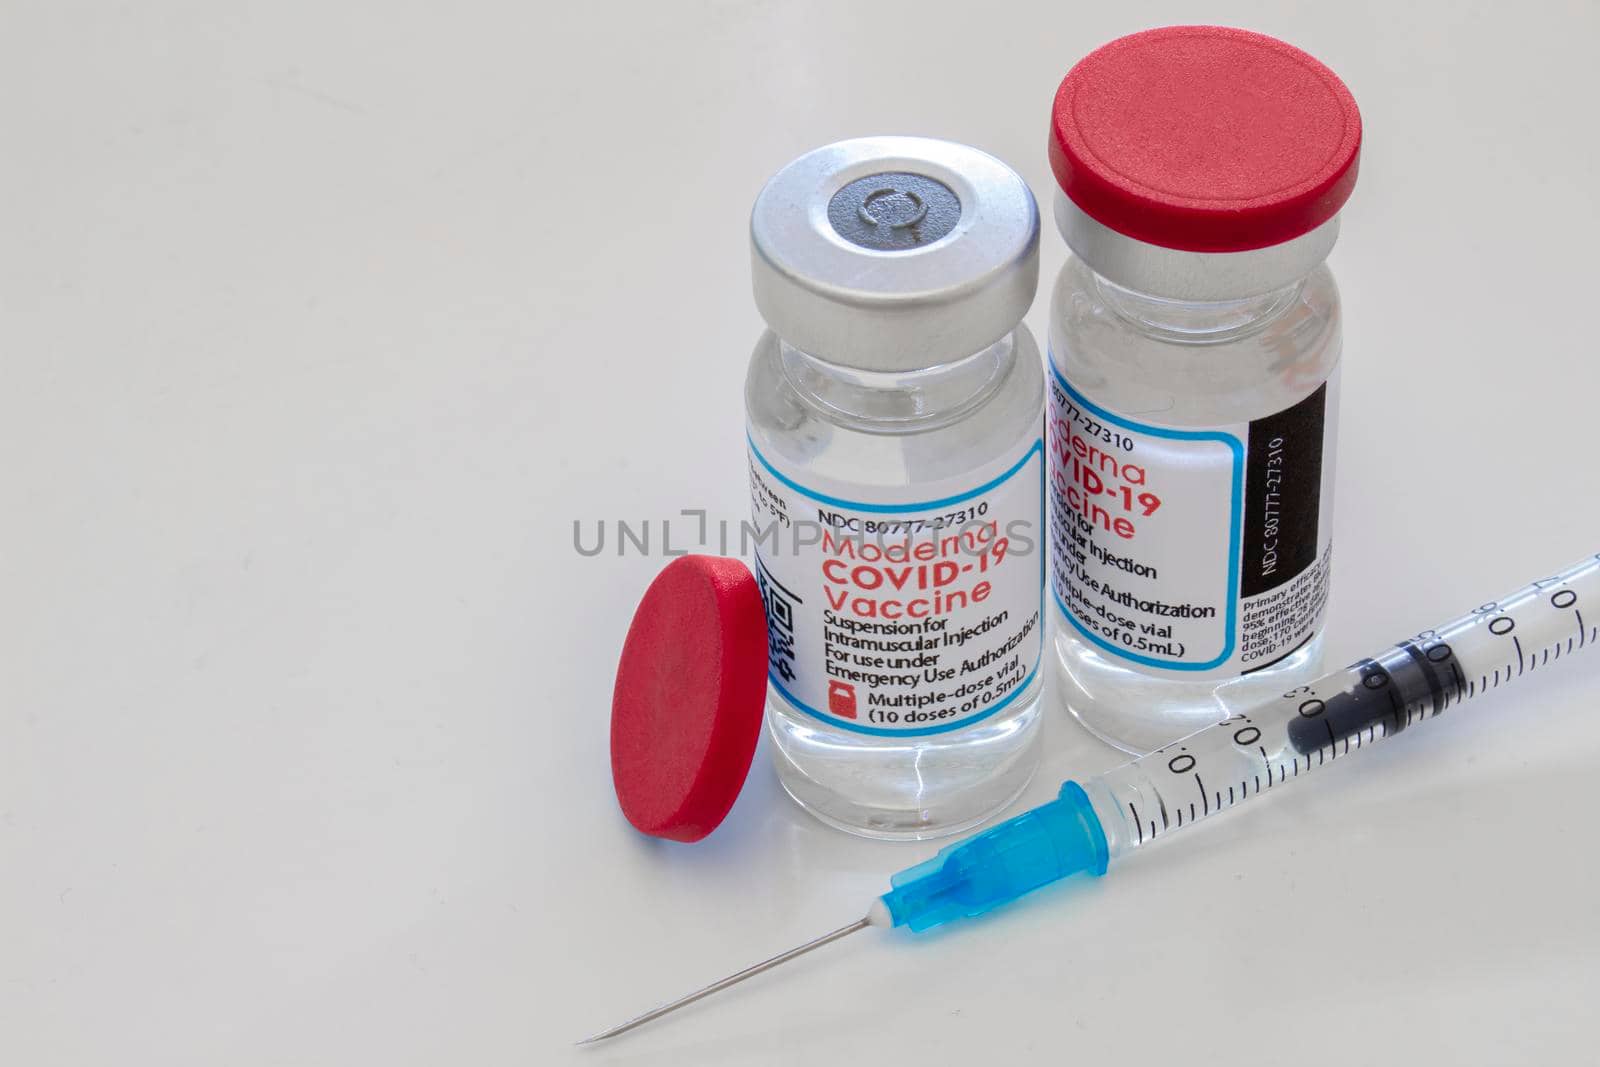 Calgary, Alberta, Canada. April 16, 2021. A couple of Moderna Covid-19 vaccine vials bottles and an injection syringe on a clear table.